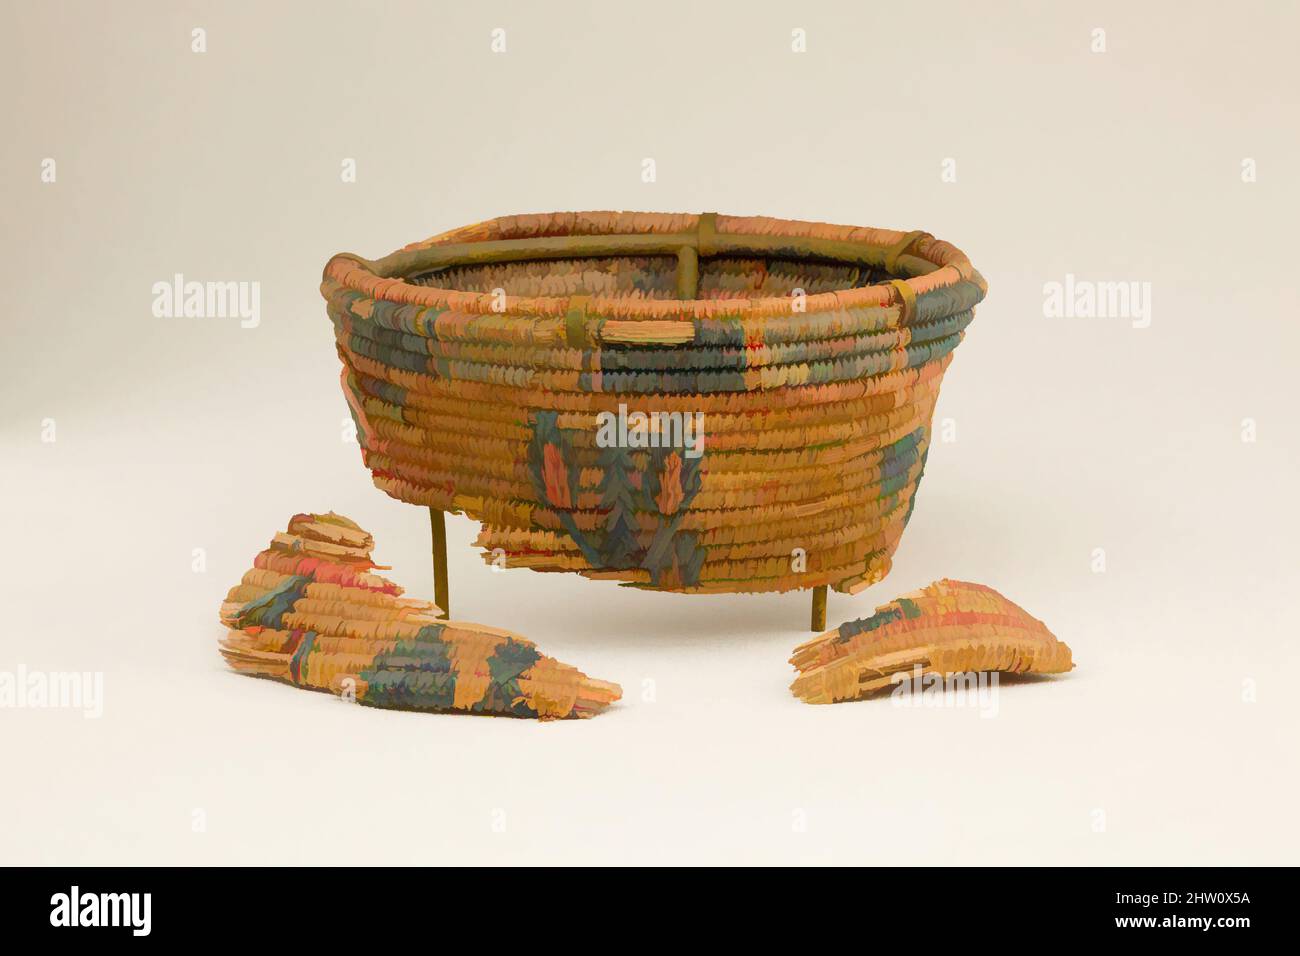 Art inspired by Basket, New Kingdom, Ramesside, Dynasty 19–20, ca. 1295–1070 B.C., From Egypt, Upper Egypt, Thebes, Khokha, Tomb of Aafenmut, Fiber, Classic works modernized by Artotop with a splash of modernity. Shapes, color and value, eye-catching visual impact on art. Emotions through freedom of artworks in a contemporary way. A timeless message pursuing a wildly creative new direction. Artists turning to the digital medium and creating the Artotop NFT Stock Photo